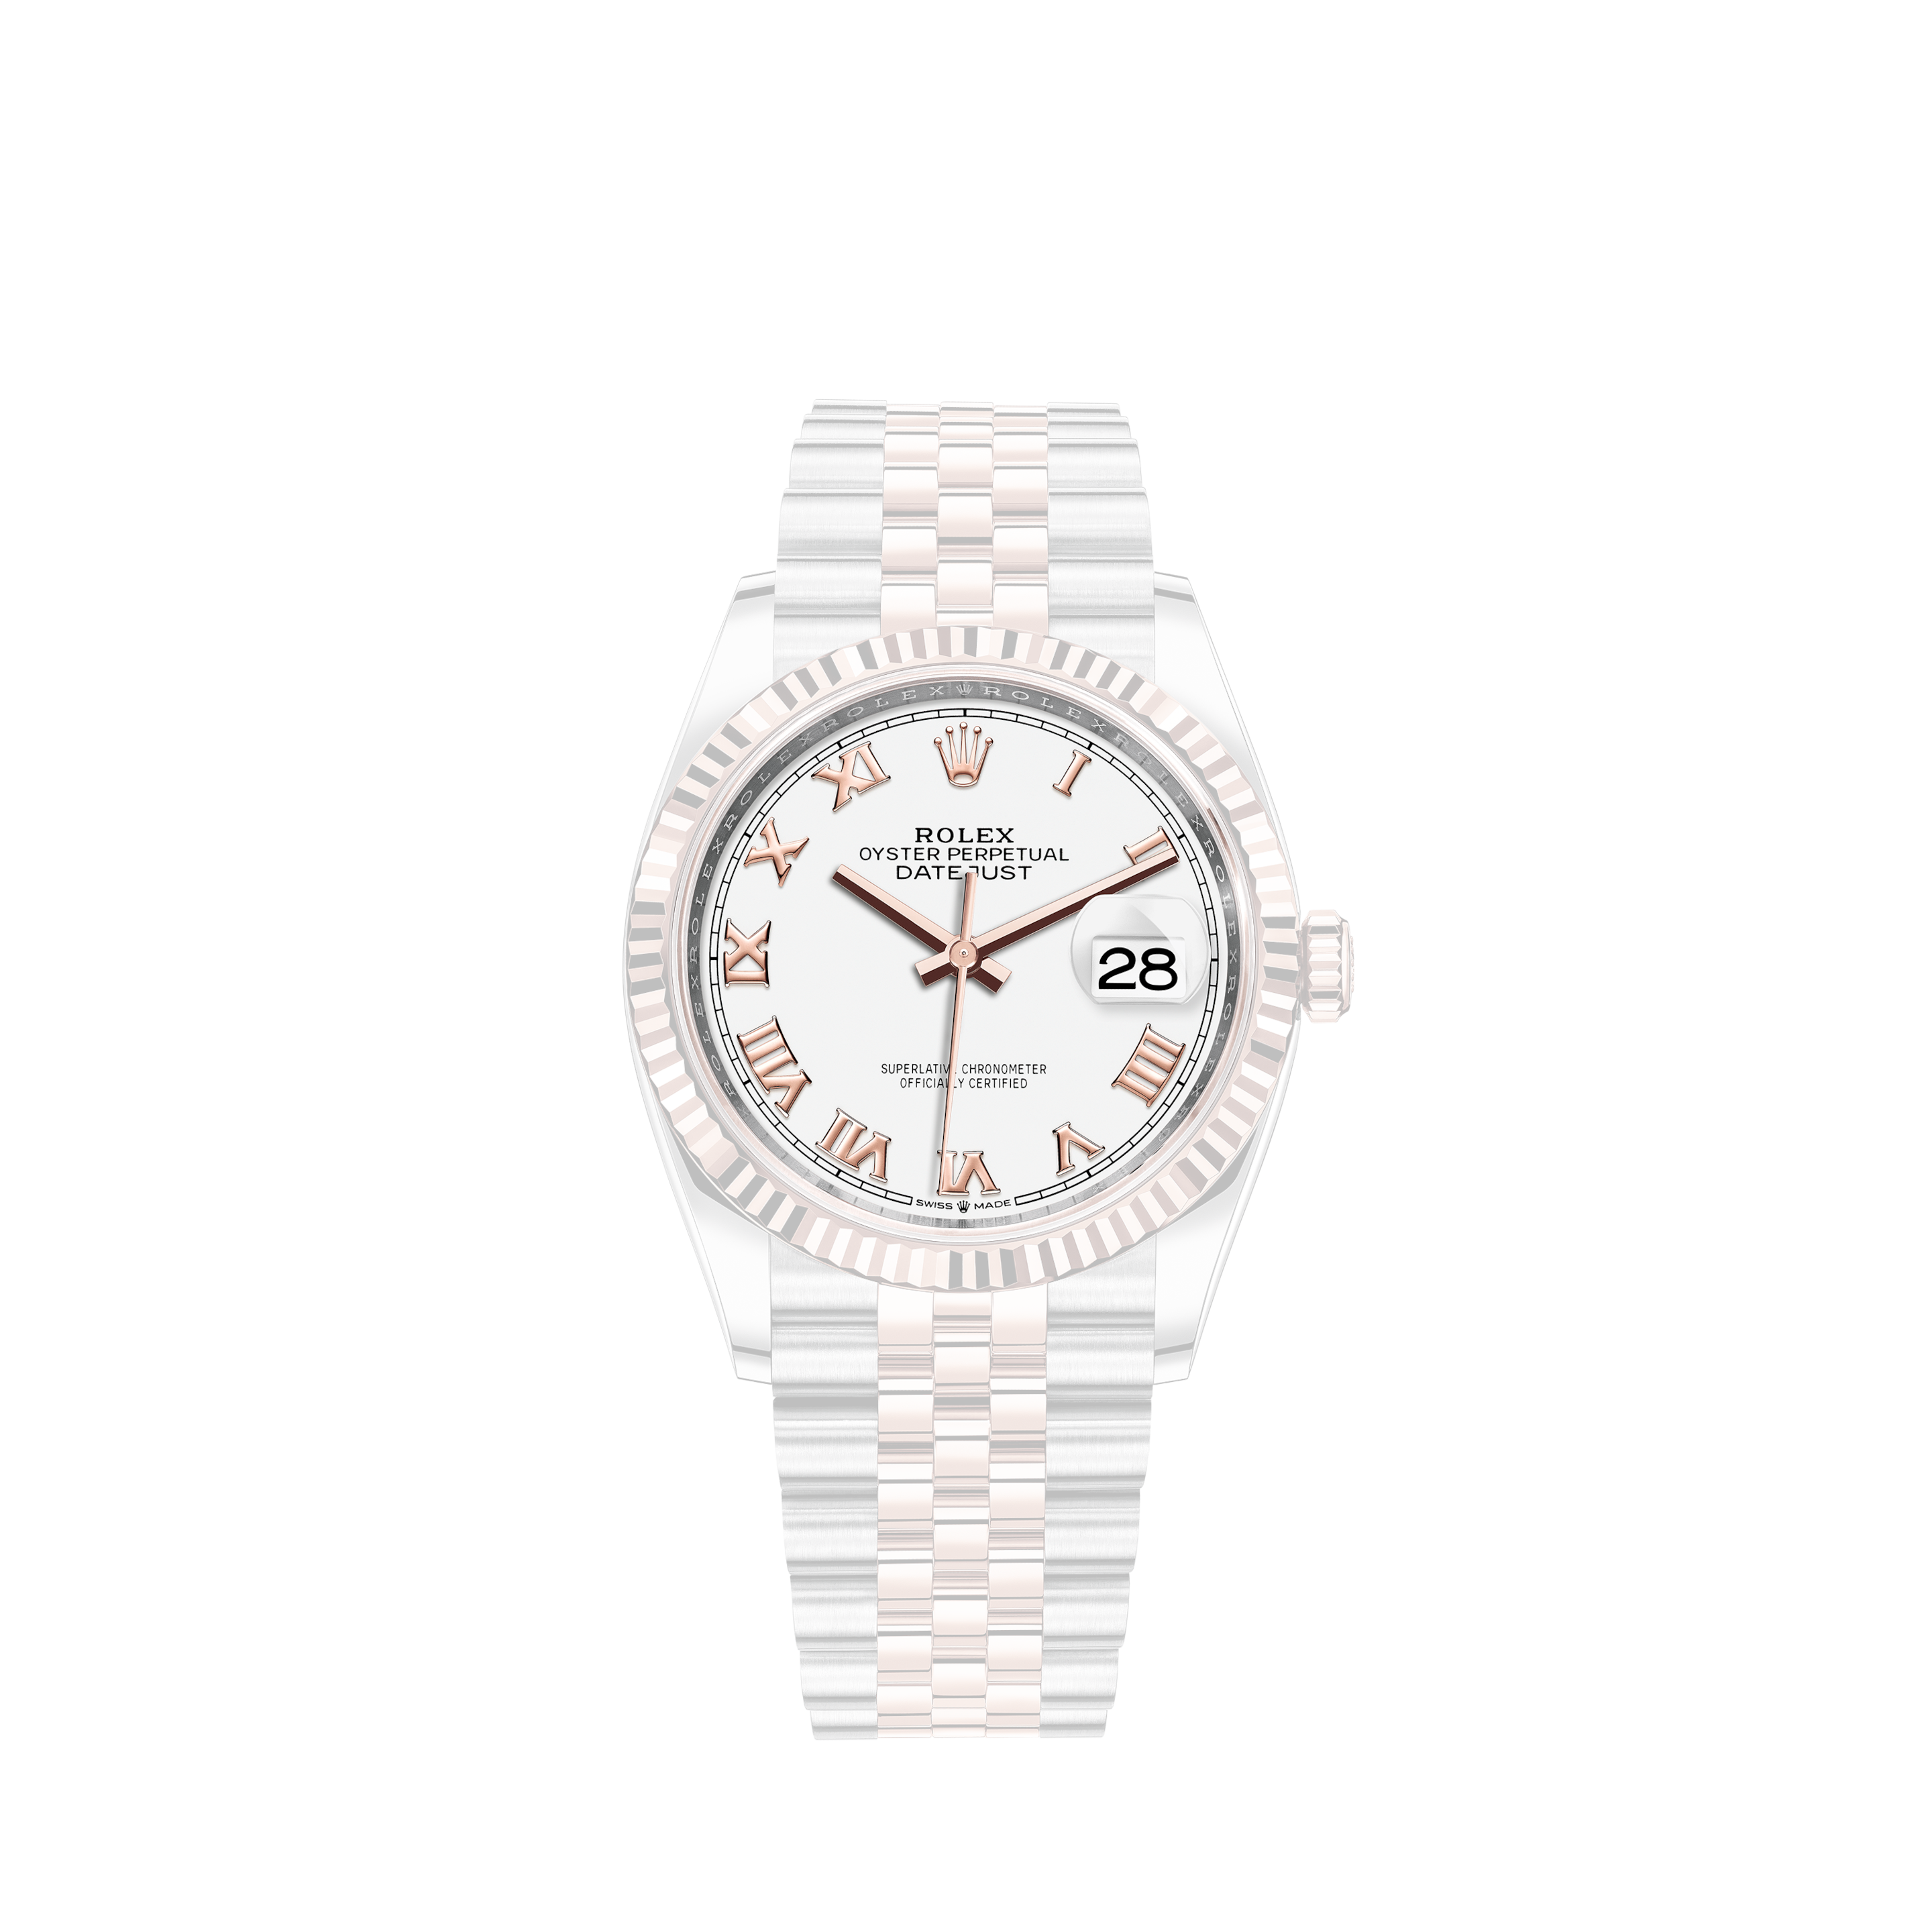 Rolex Lady-Datejust 69174 White MOP Diamond Dial Diamond Bezel W/ BOX & PAPERSRolex Lady-Datejust 69174 White Roman Dial Fluted Bezel 26mm Watch-With Original Certificate